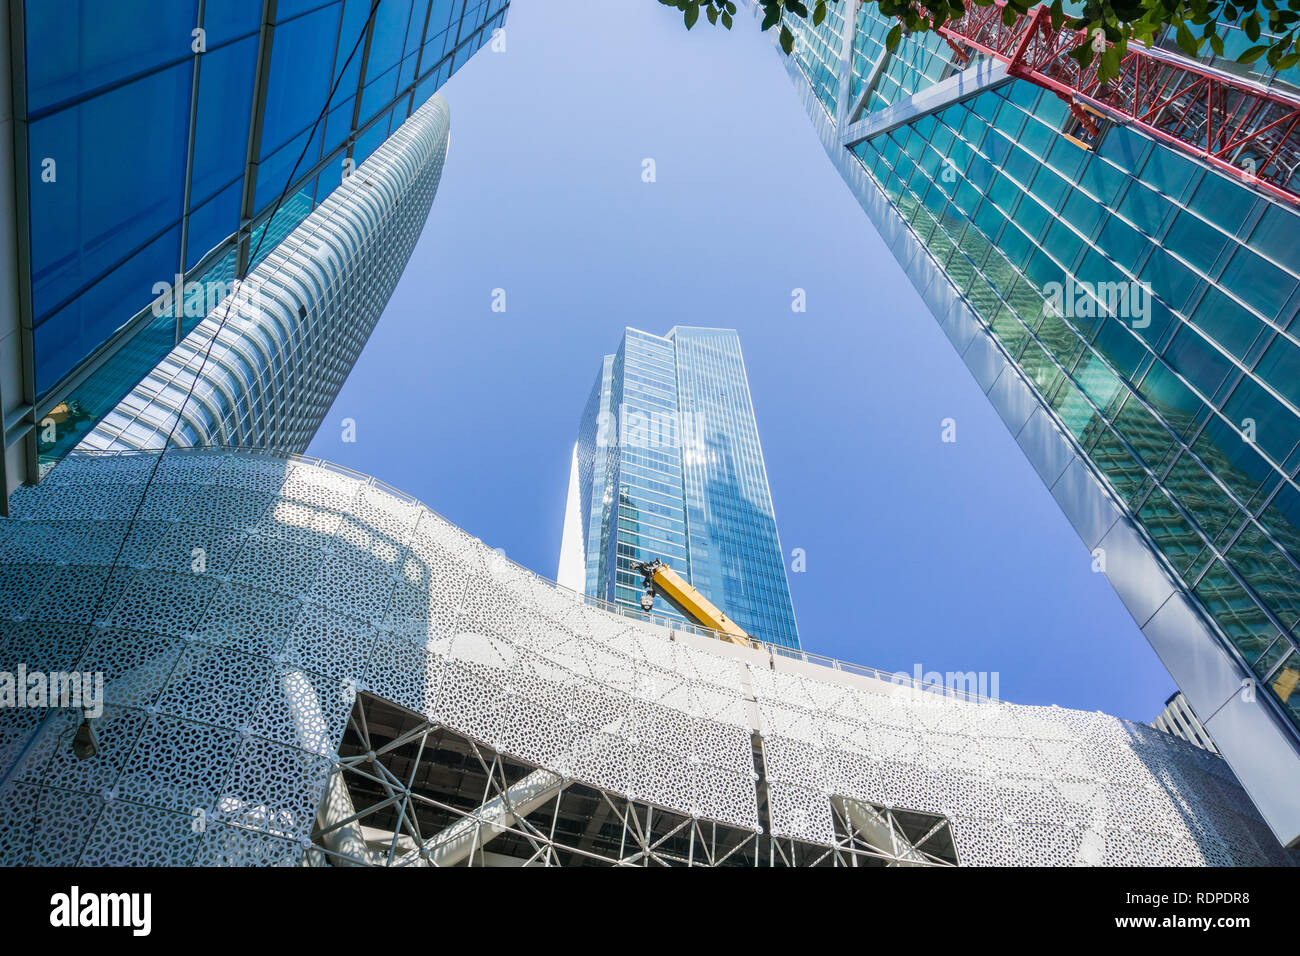 Ground level view of the tall skyscrapers rising up in San Francisco's financial district, California Stock Photo